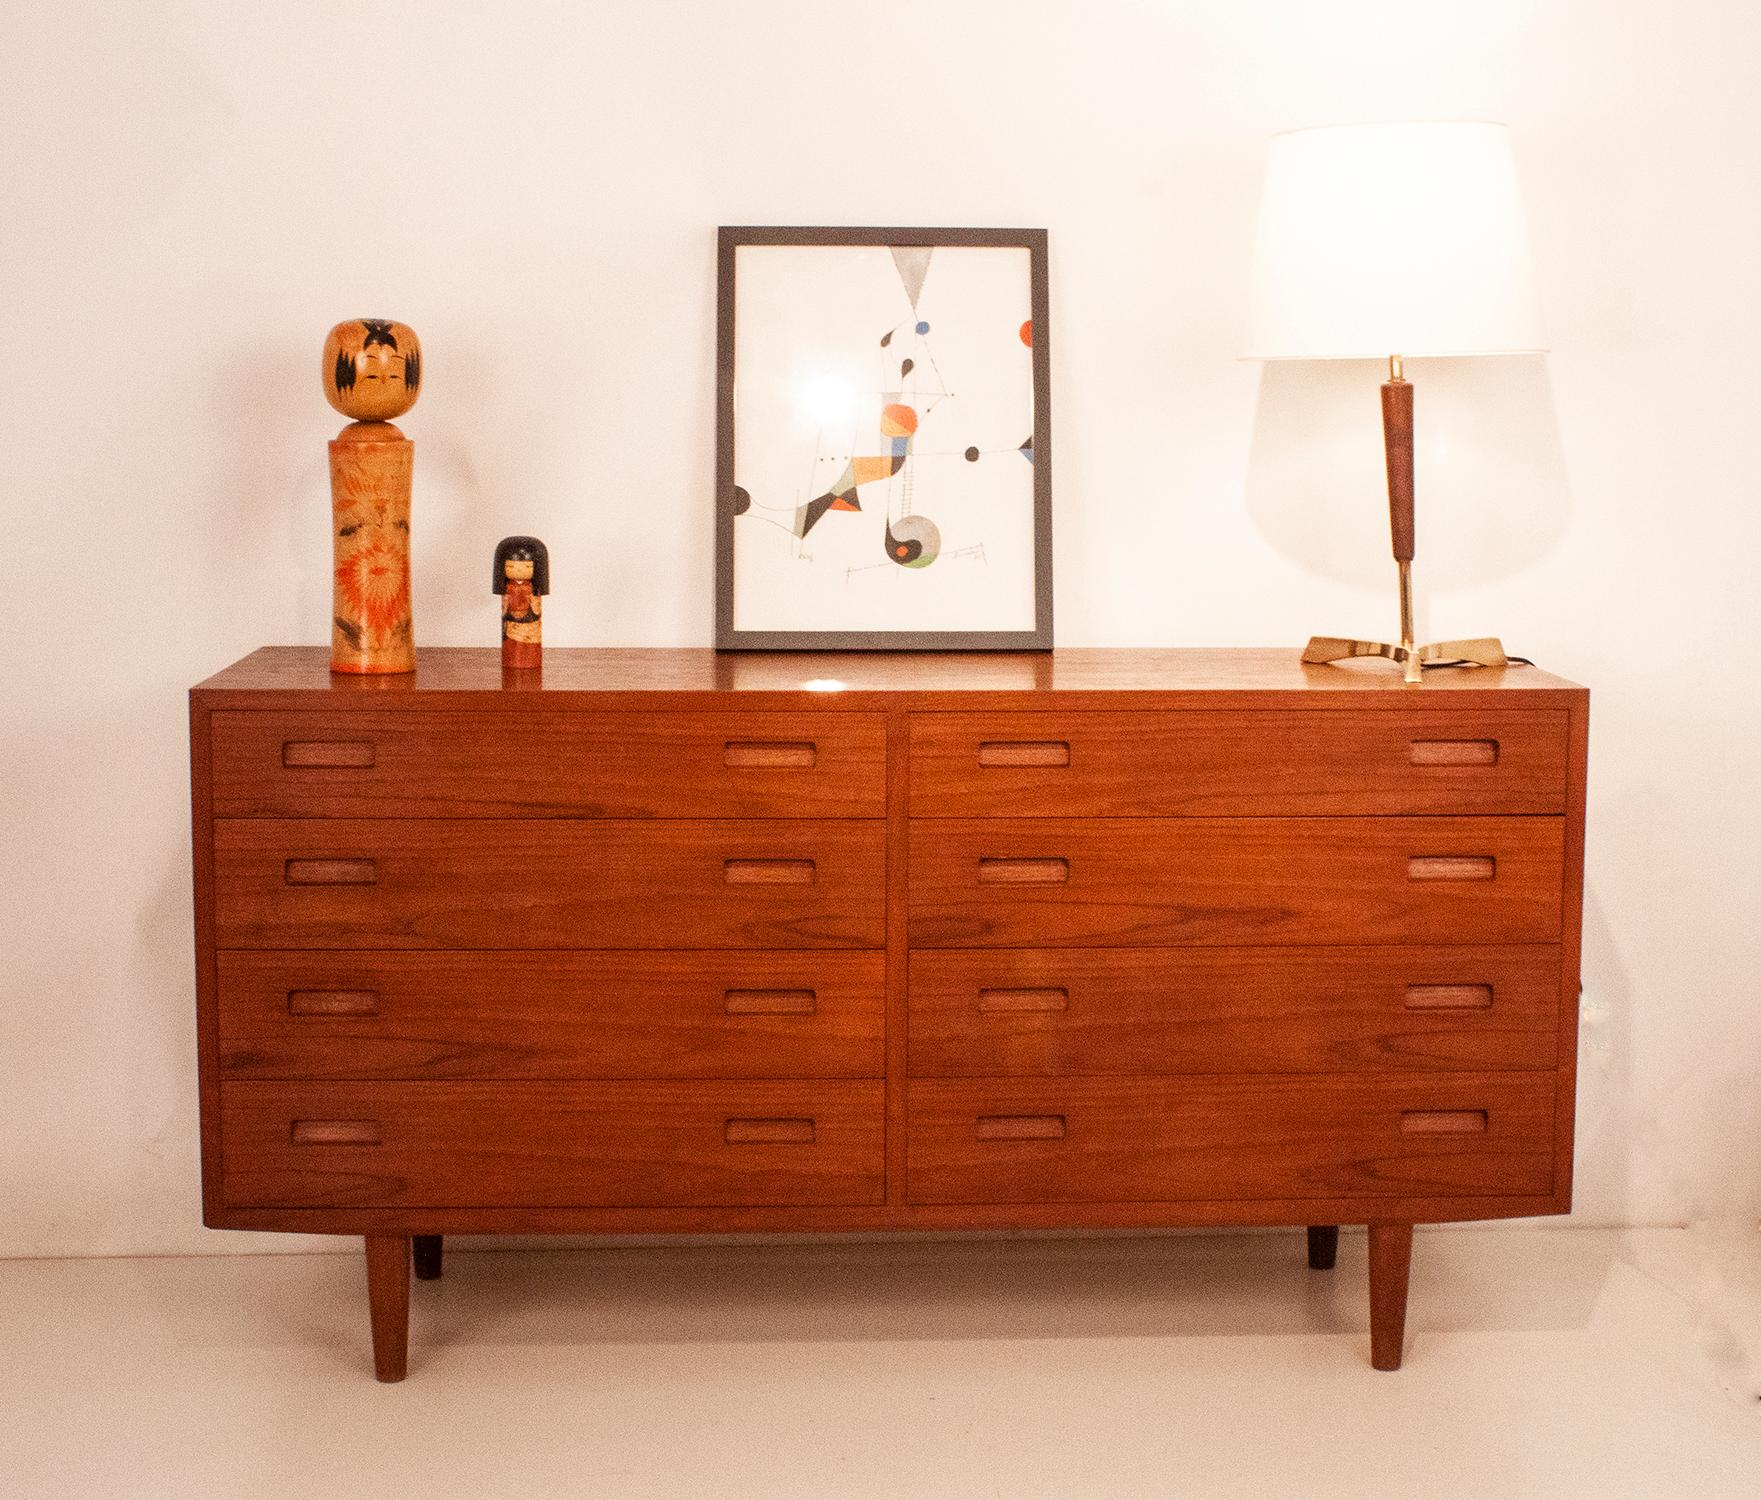 Midcentury chest of drawers designed by Carlo Jensen for Hundevad & Co. It was produced in Denmark during the 1960s. 
Nice proportions and good construction.